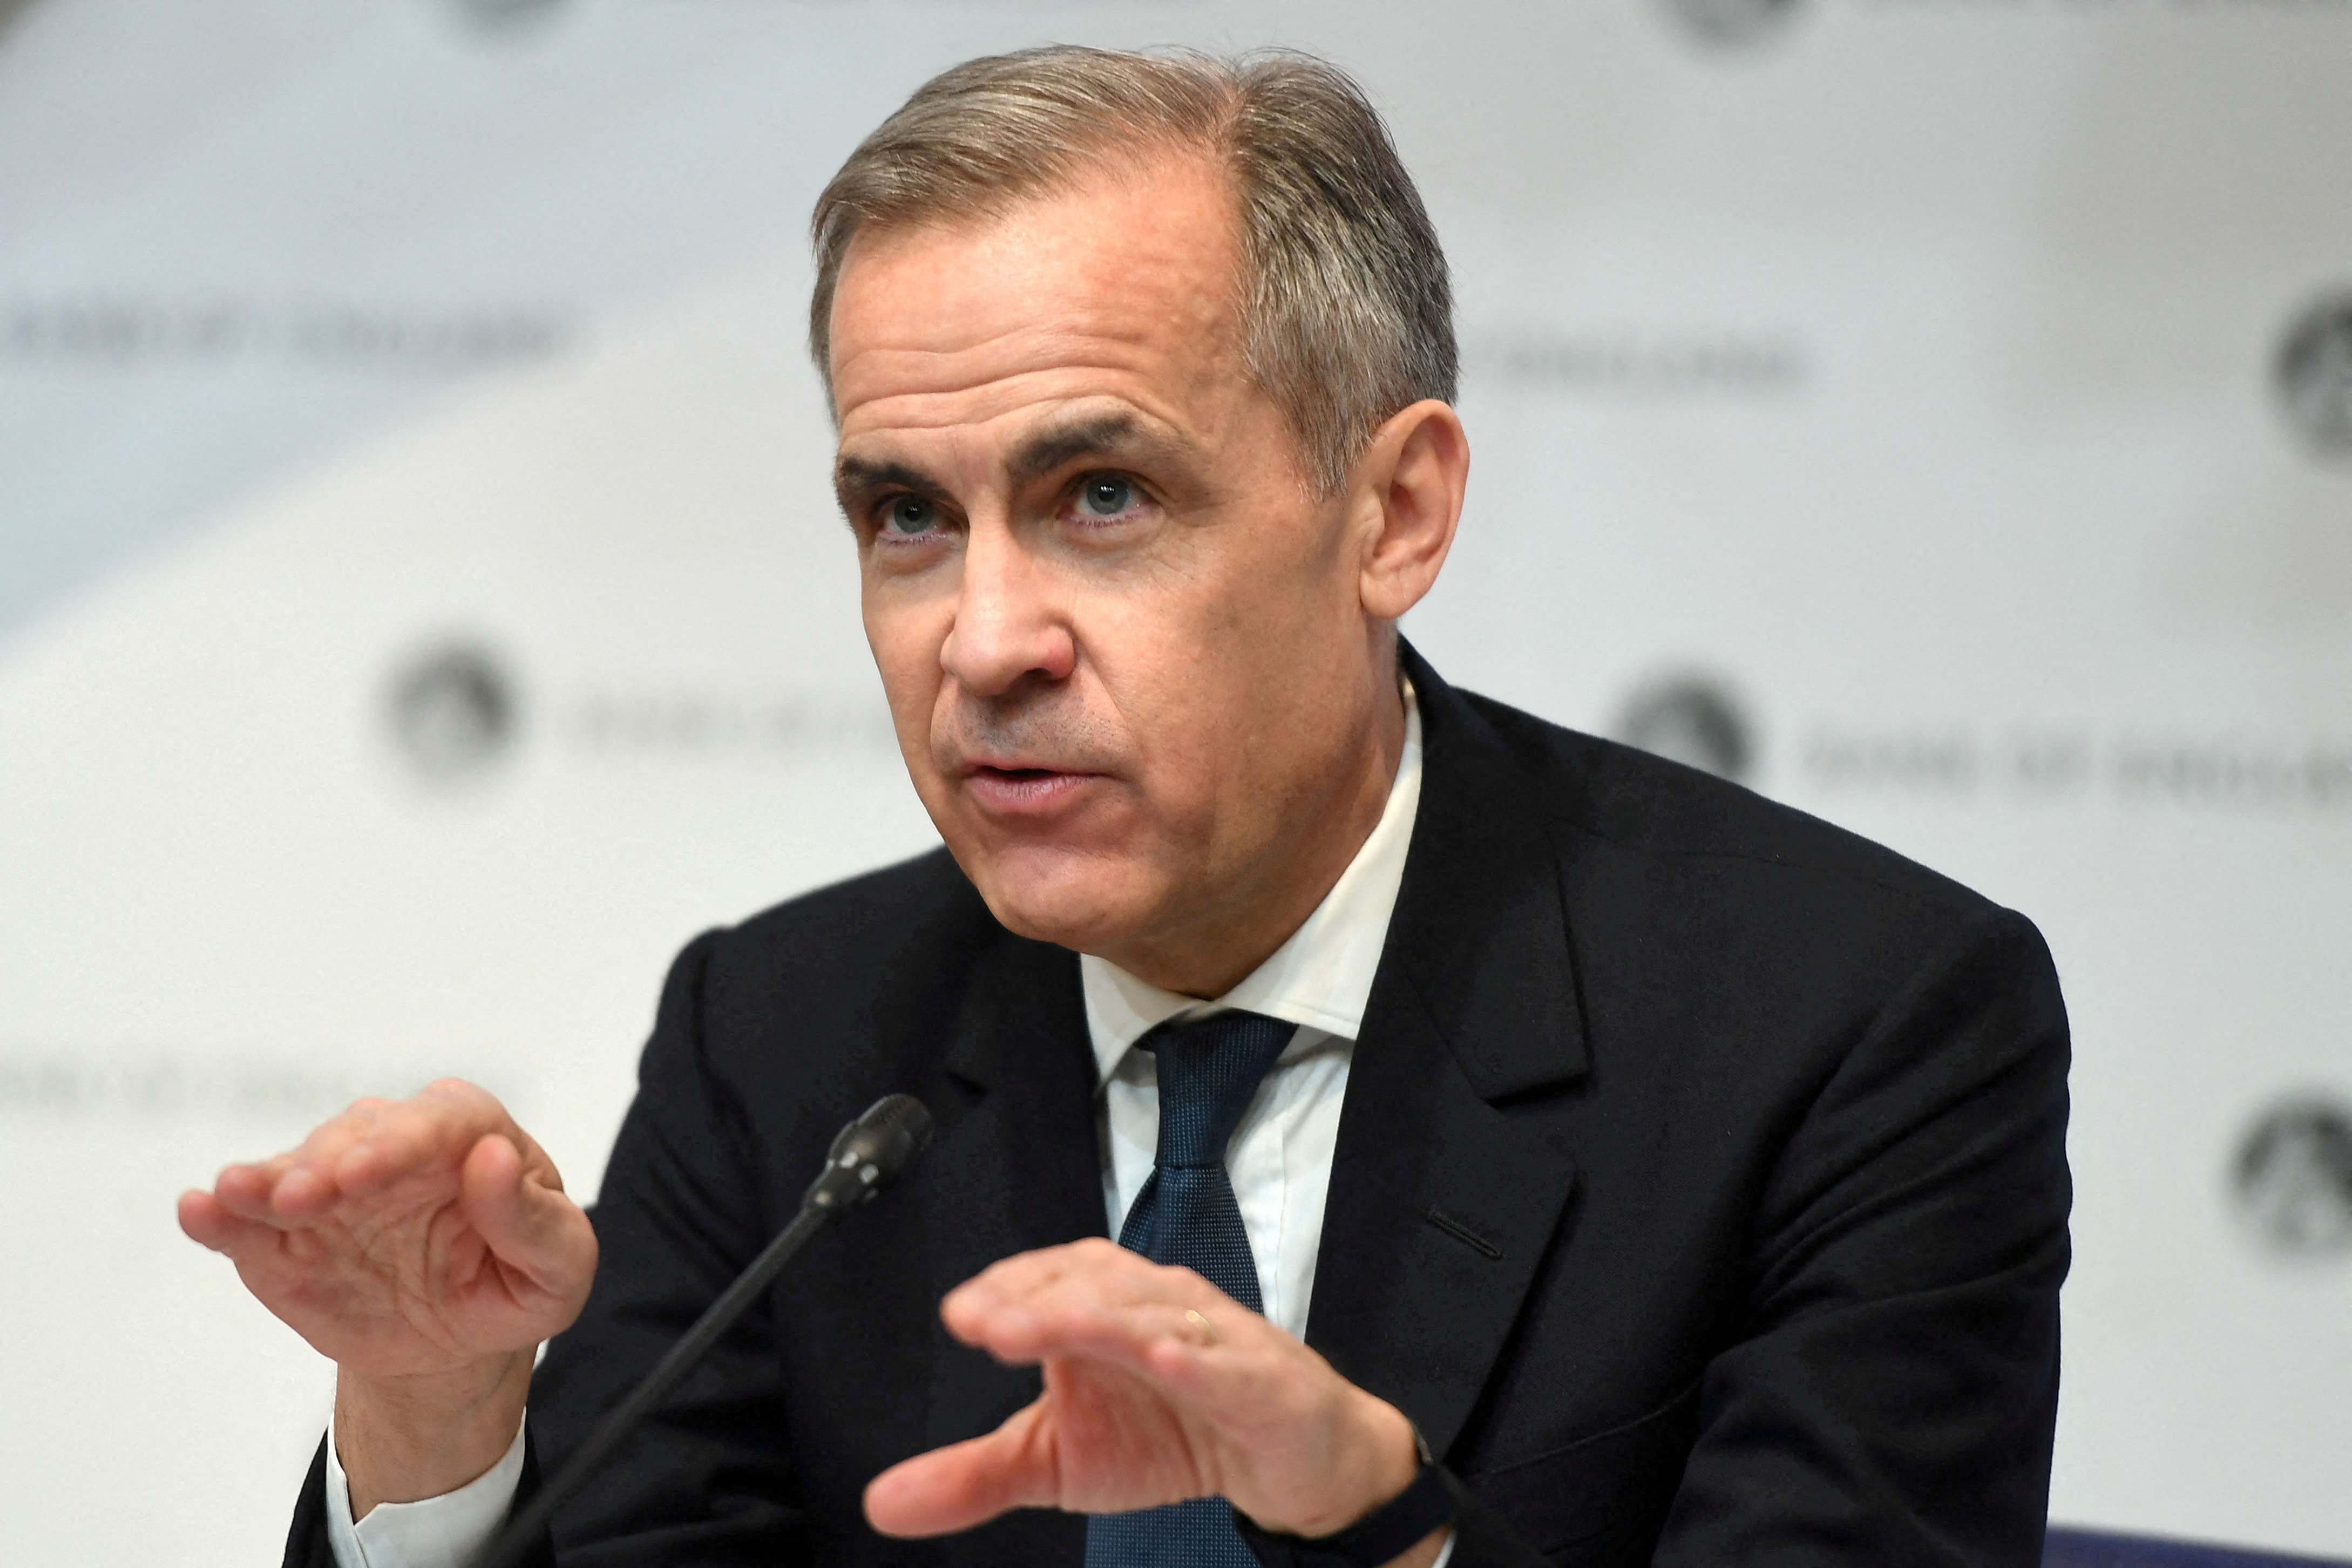 Mark Carney, Governor of the Bank of England (BOE) attends a news conference at Bank Of England in London